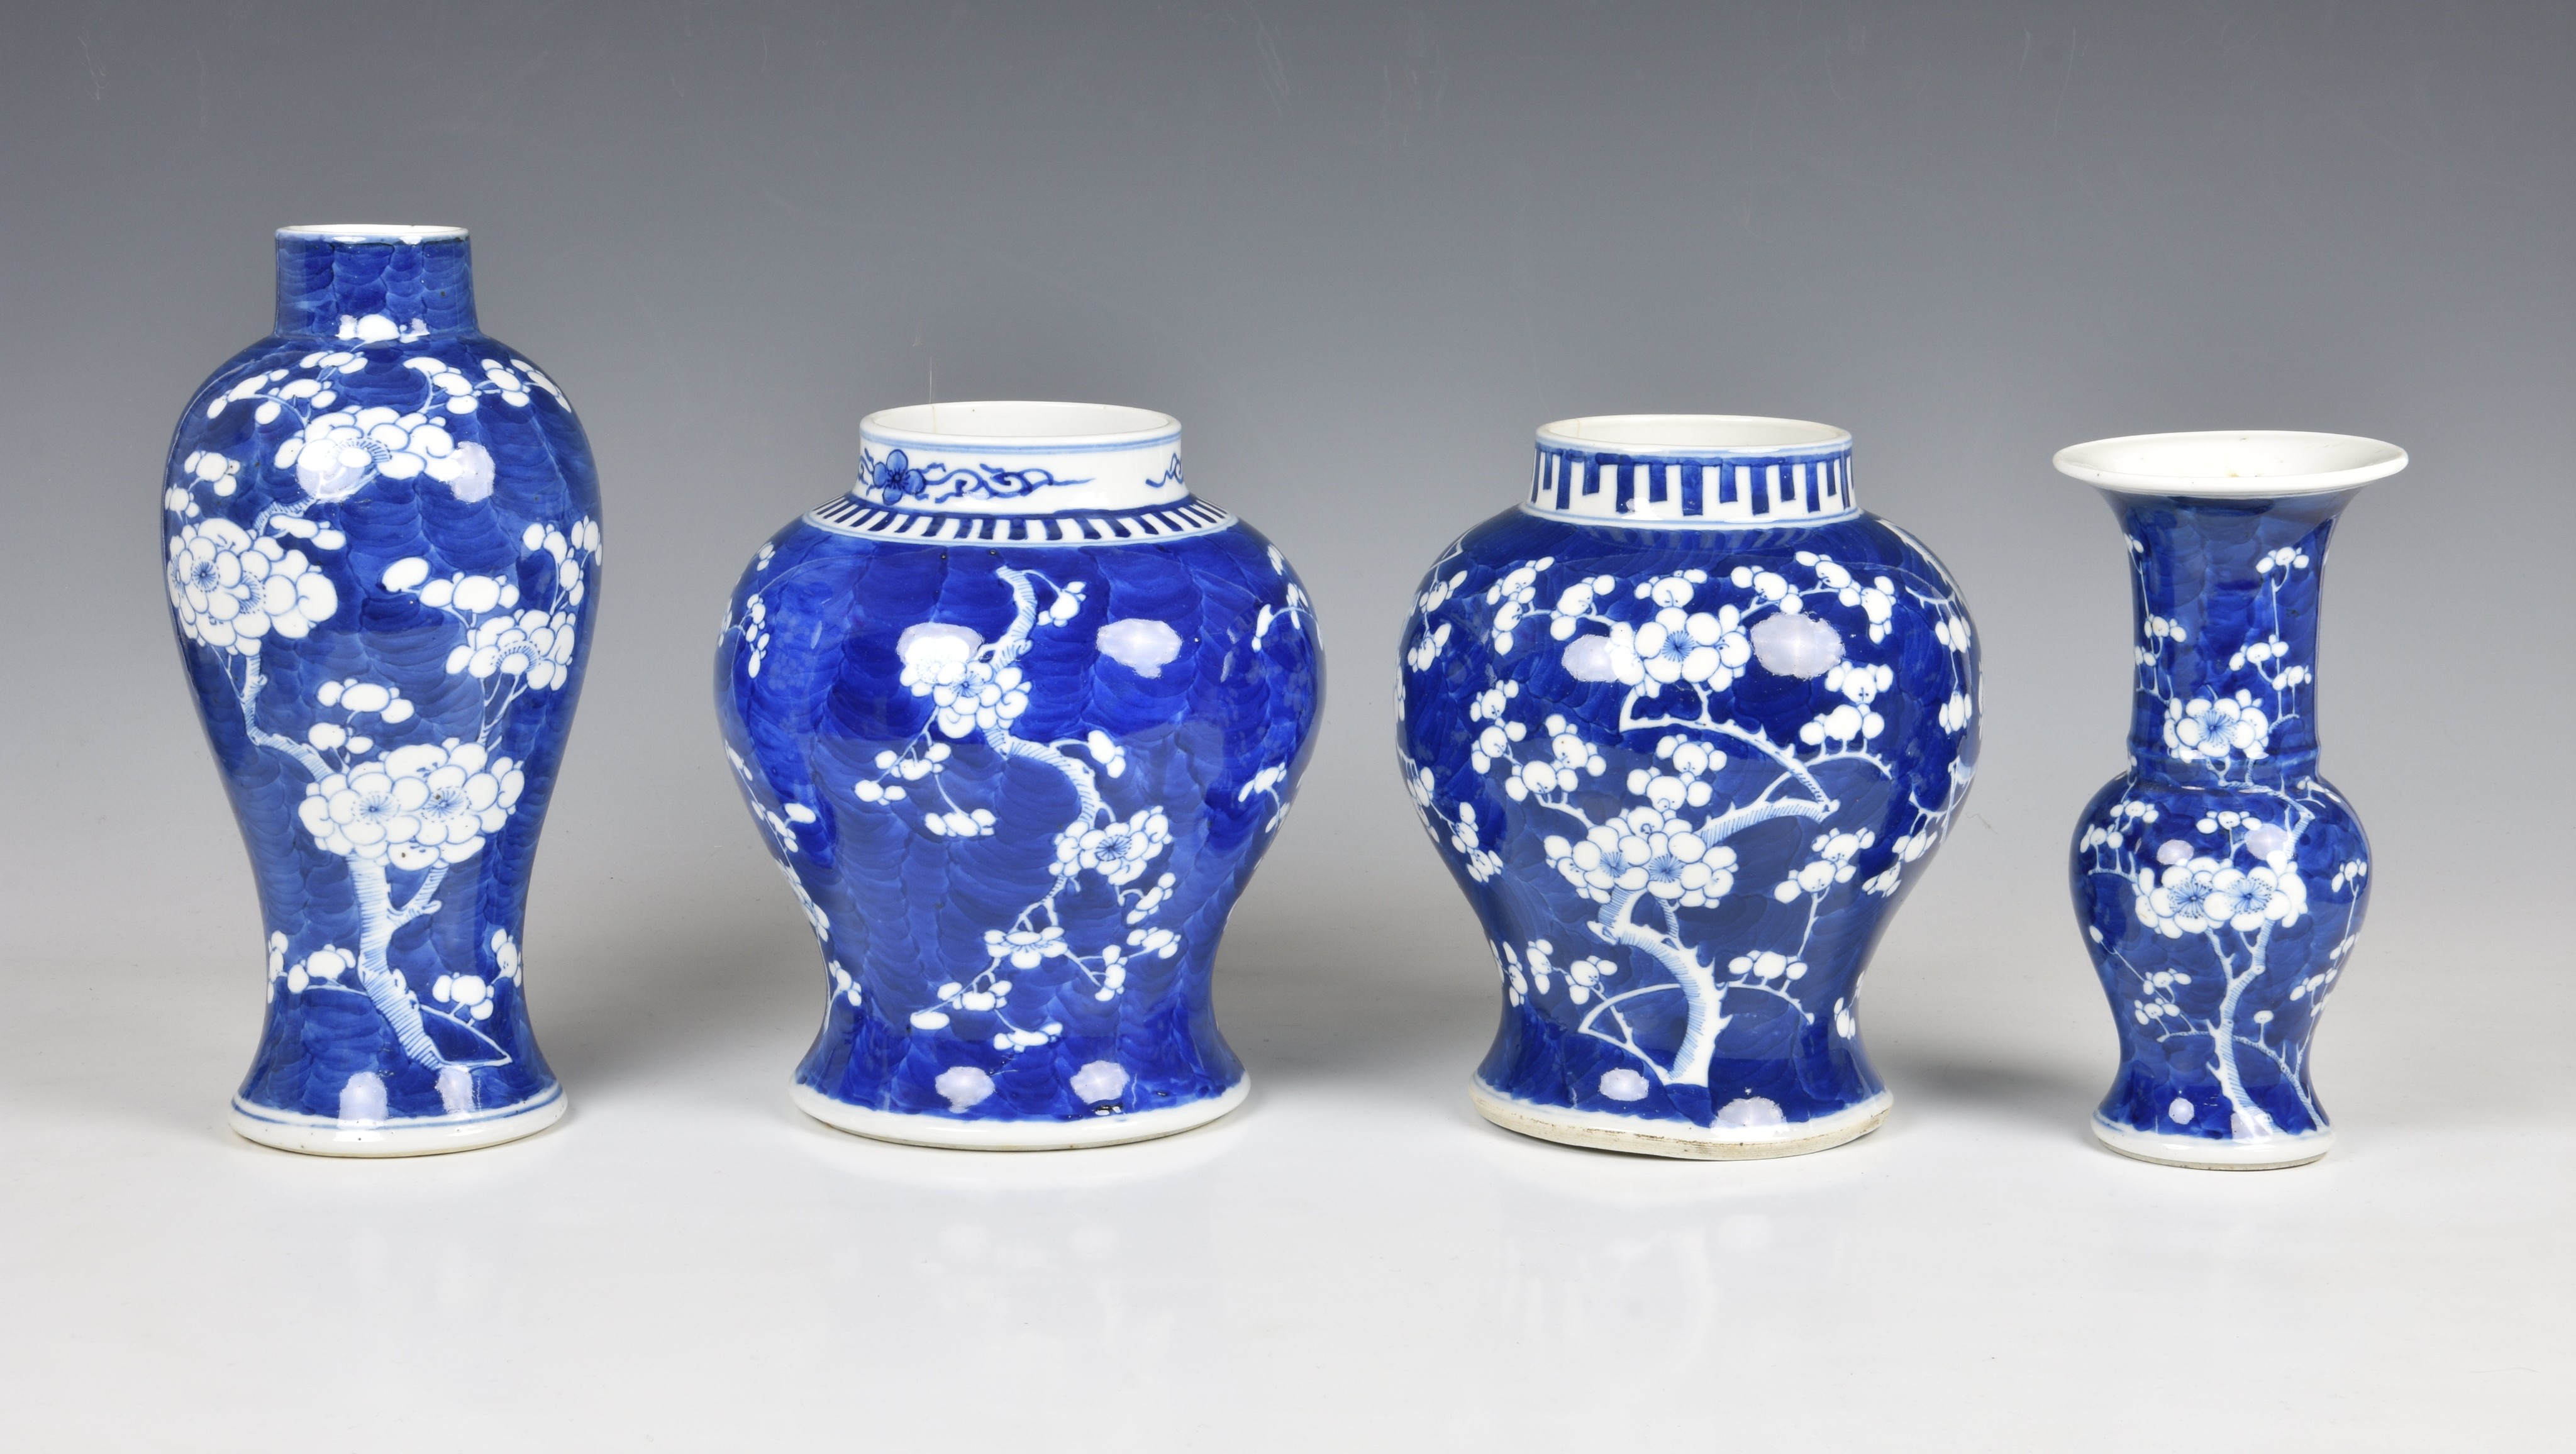 Four Chinese blue and white prunus blossom decorated vases, 20th century, comprising an inverted